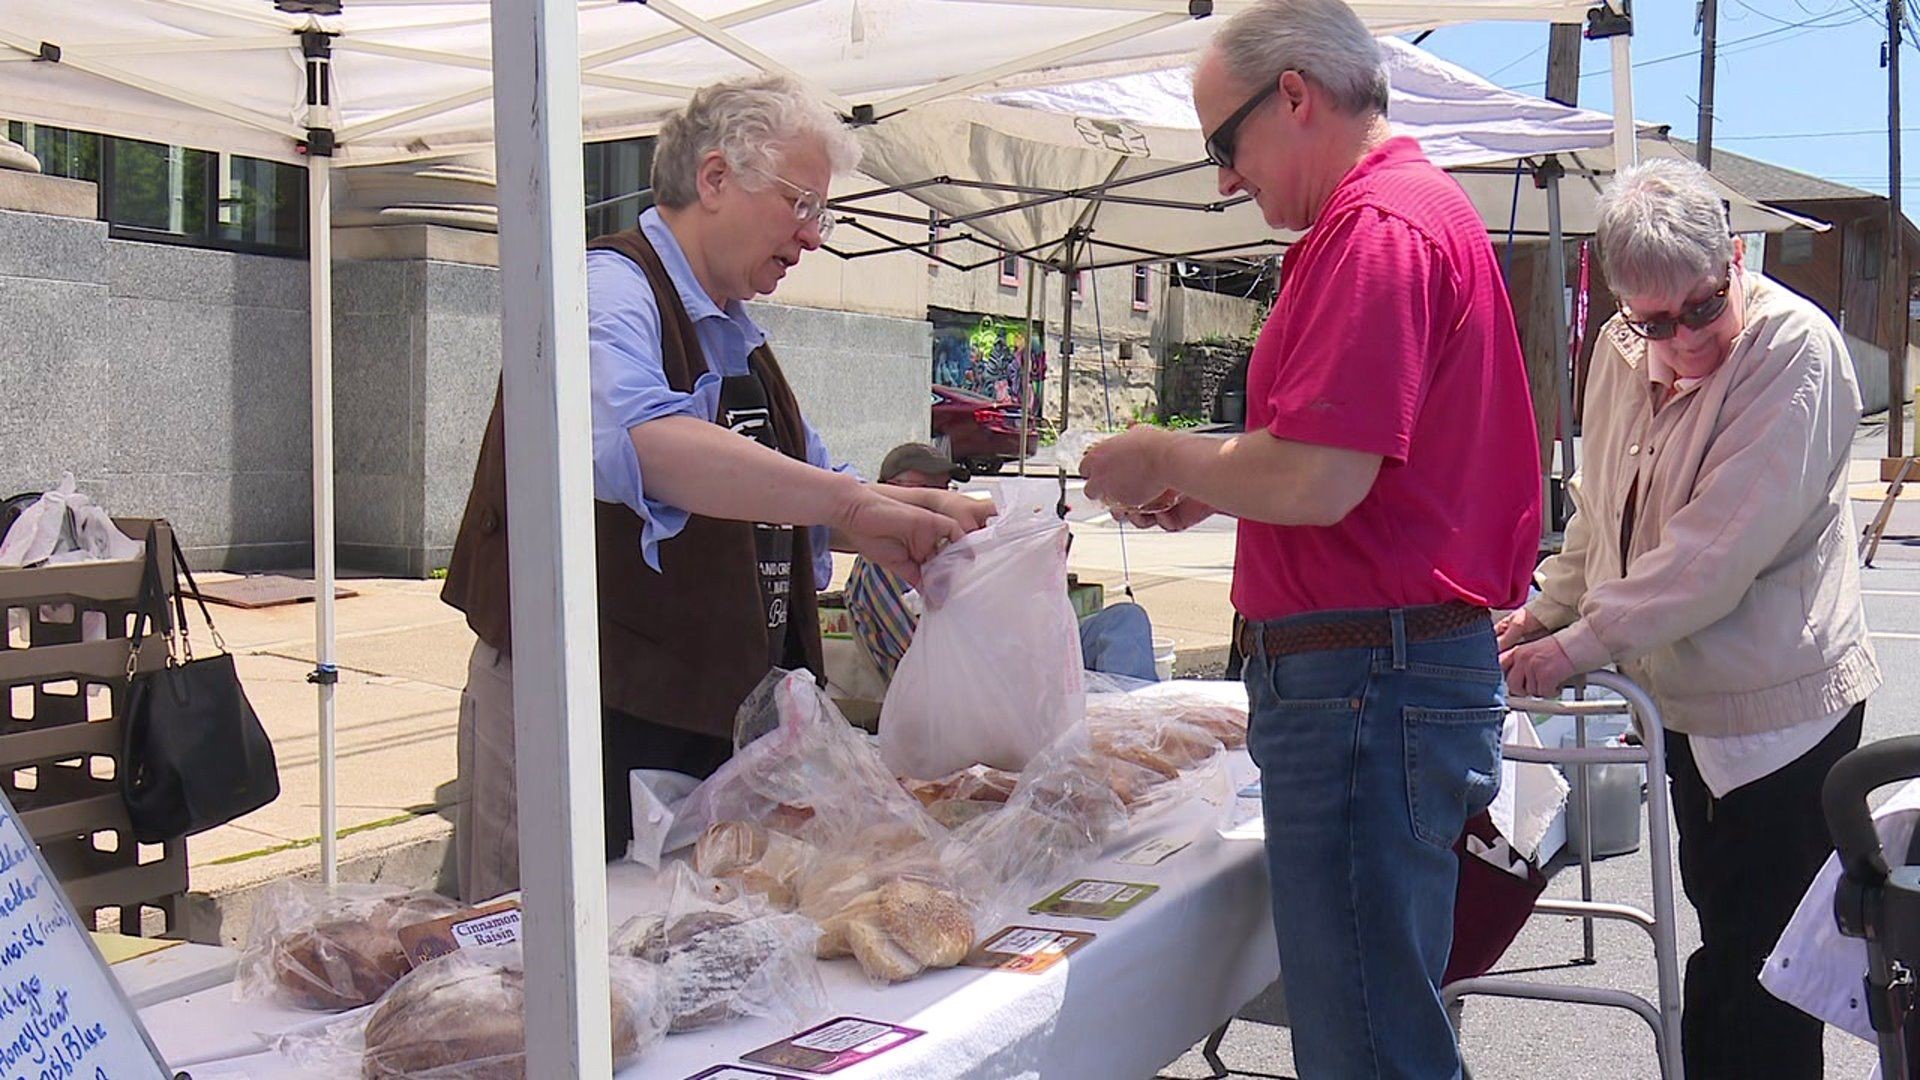 Farmers Market Returns to the Outdoors